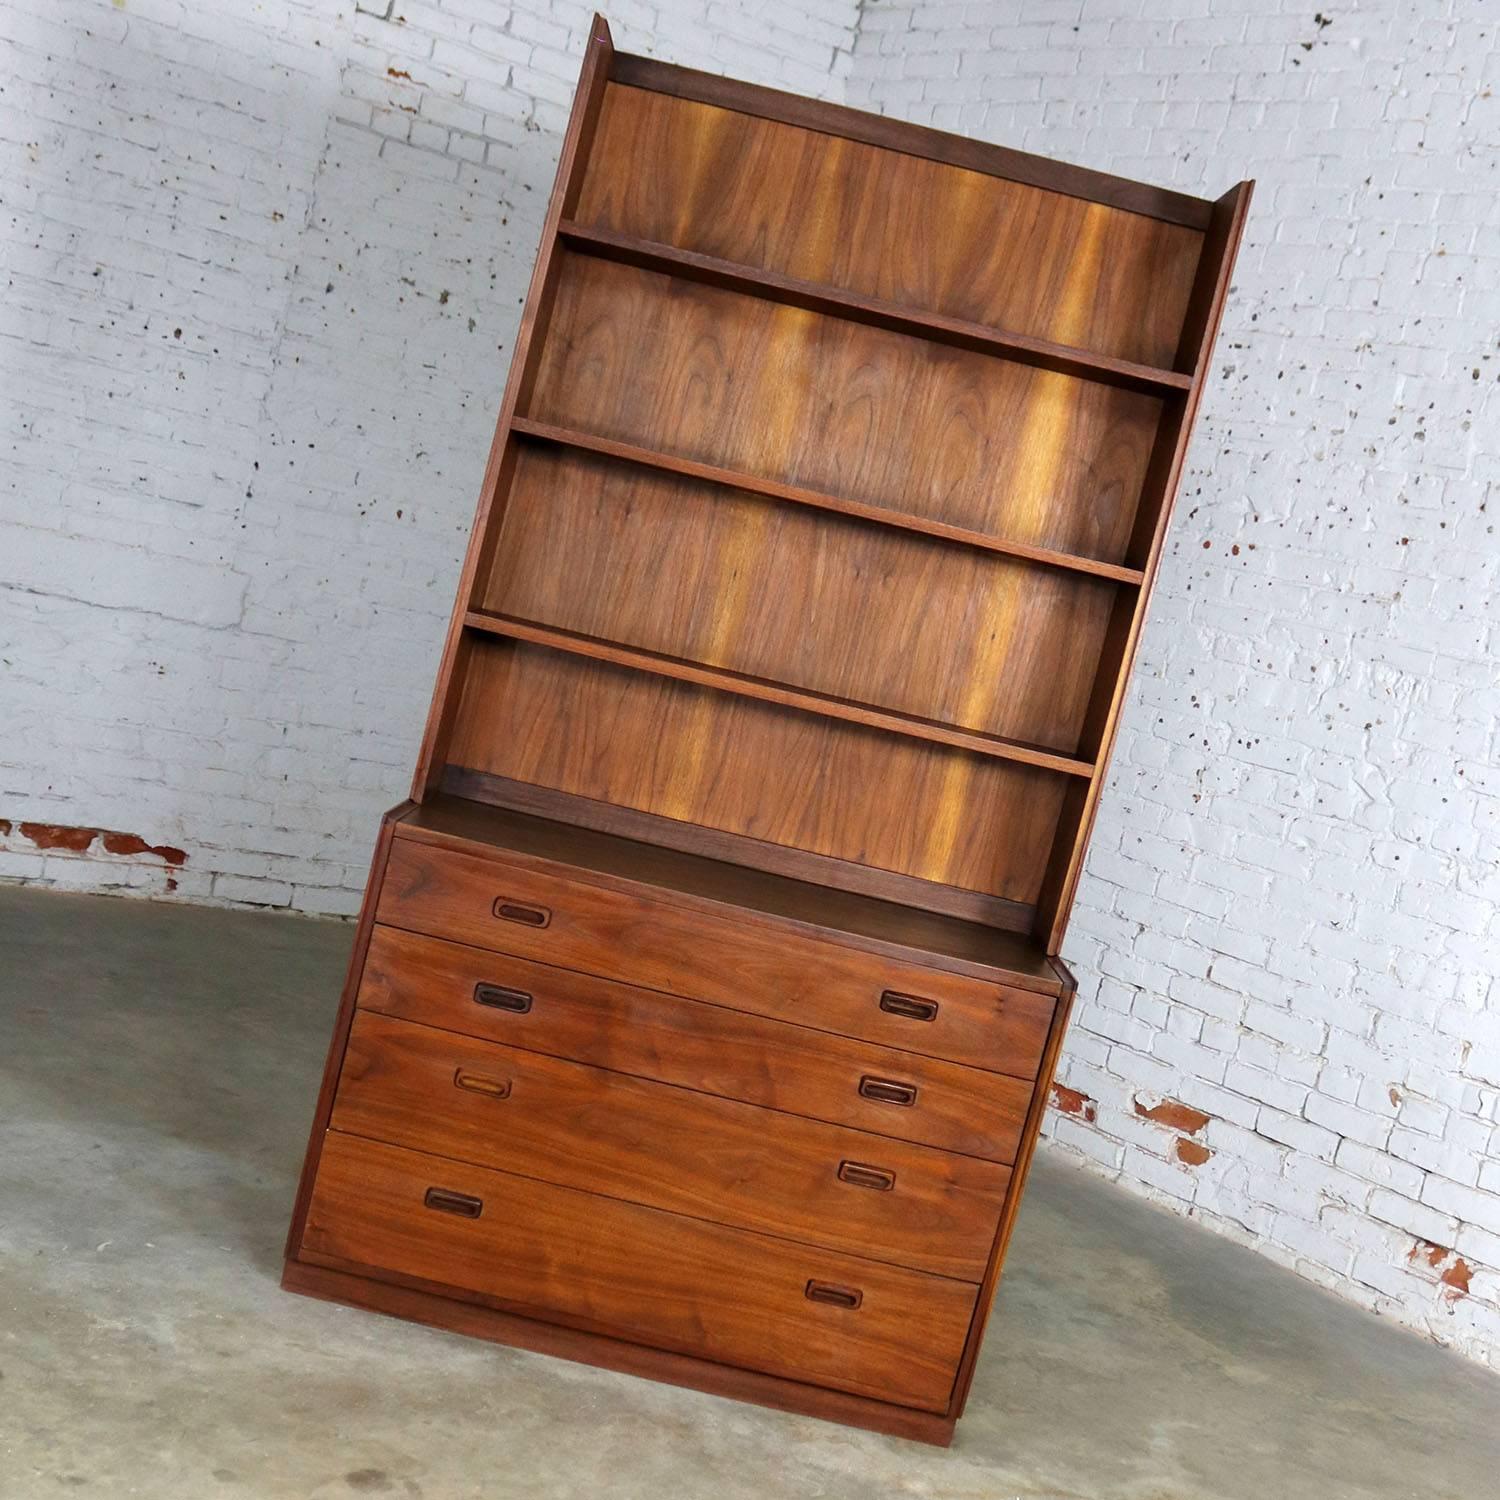 Handsome Mid-Century Modern two-piece bookcase or display cabinet which has been attributed to Founders Furniture. It is in wonderful vintage condition with no major flaws that we have seen apart from a chip in the wood on the upper side rail of the